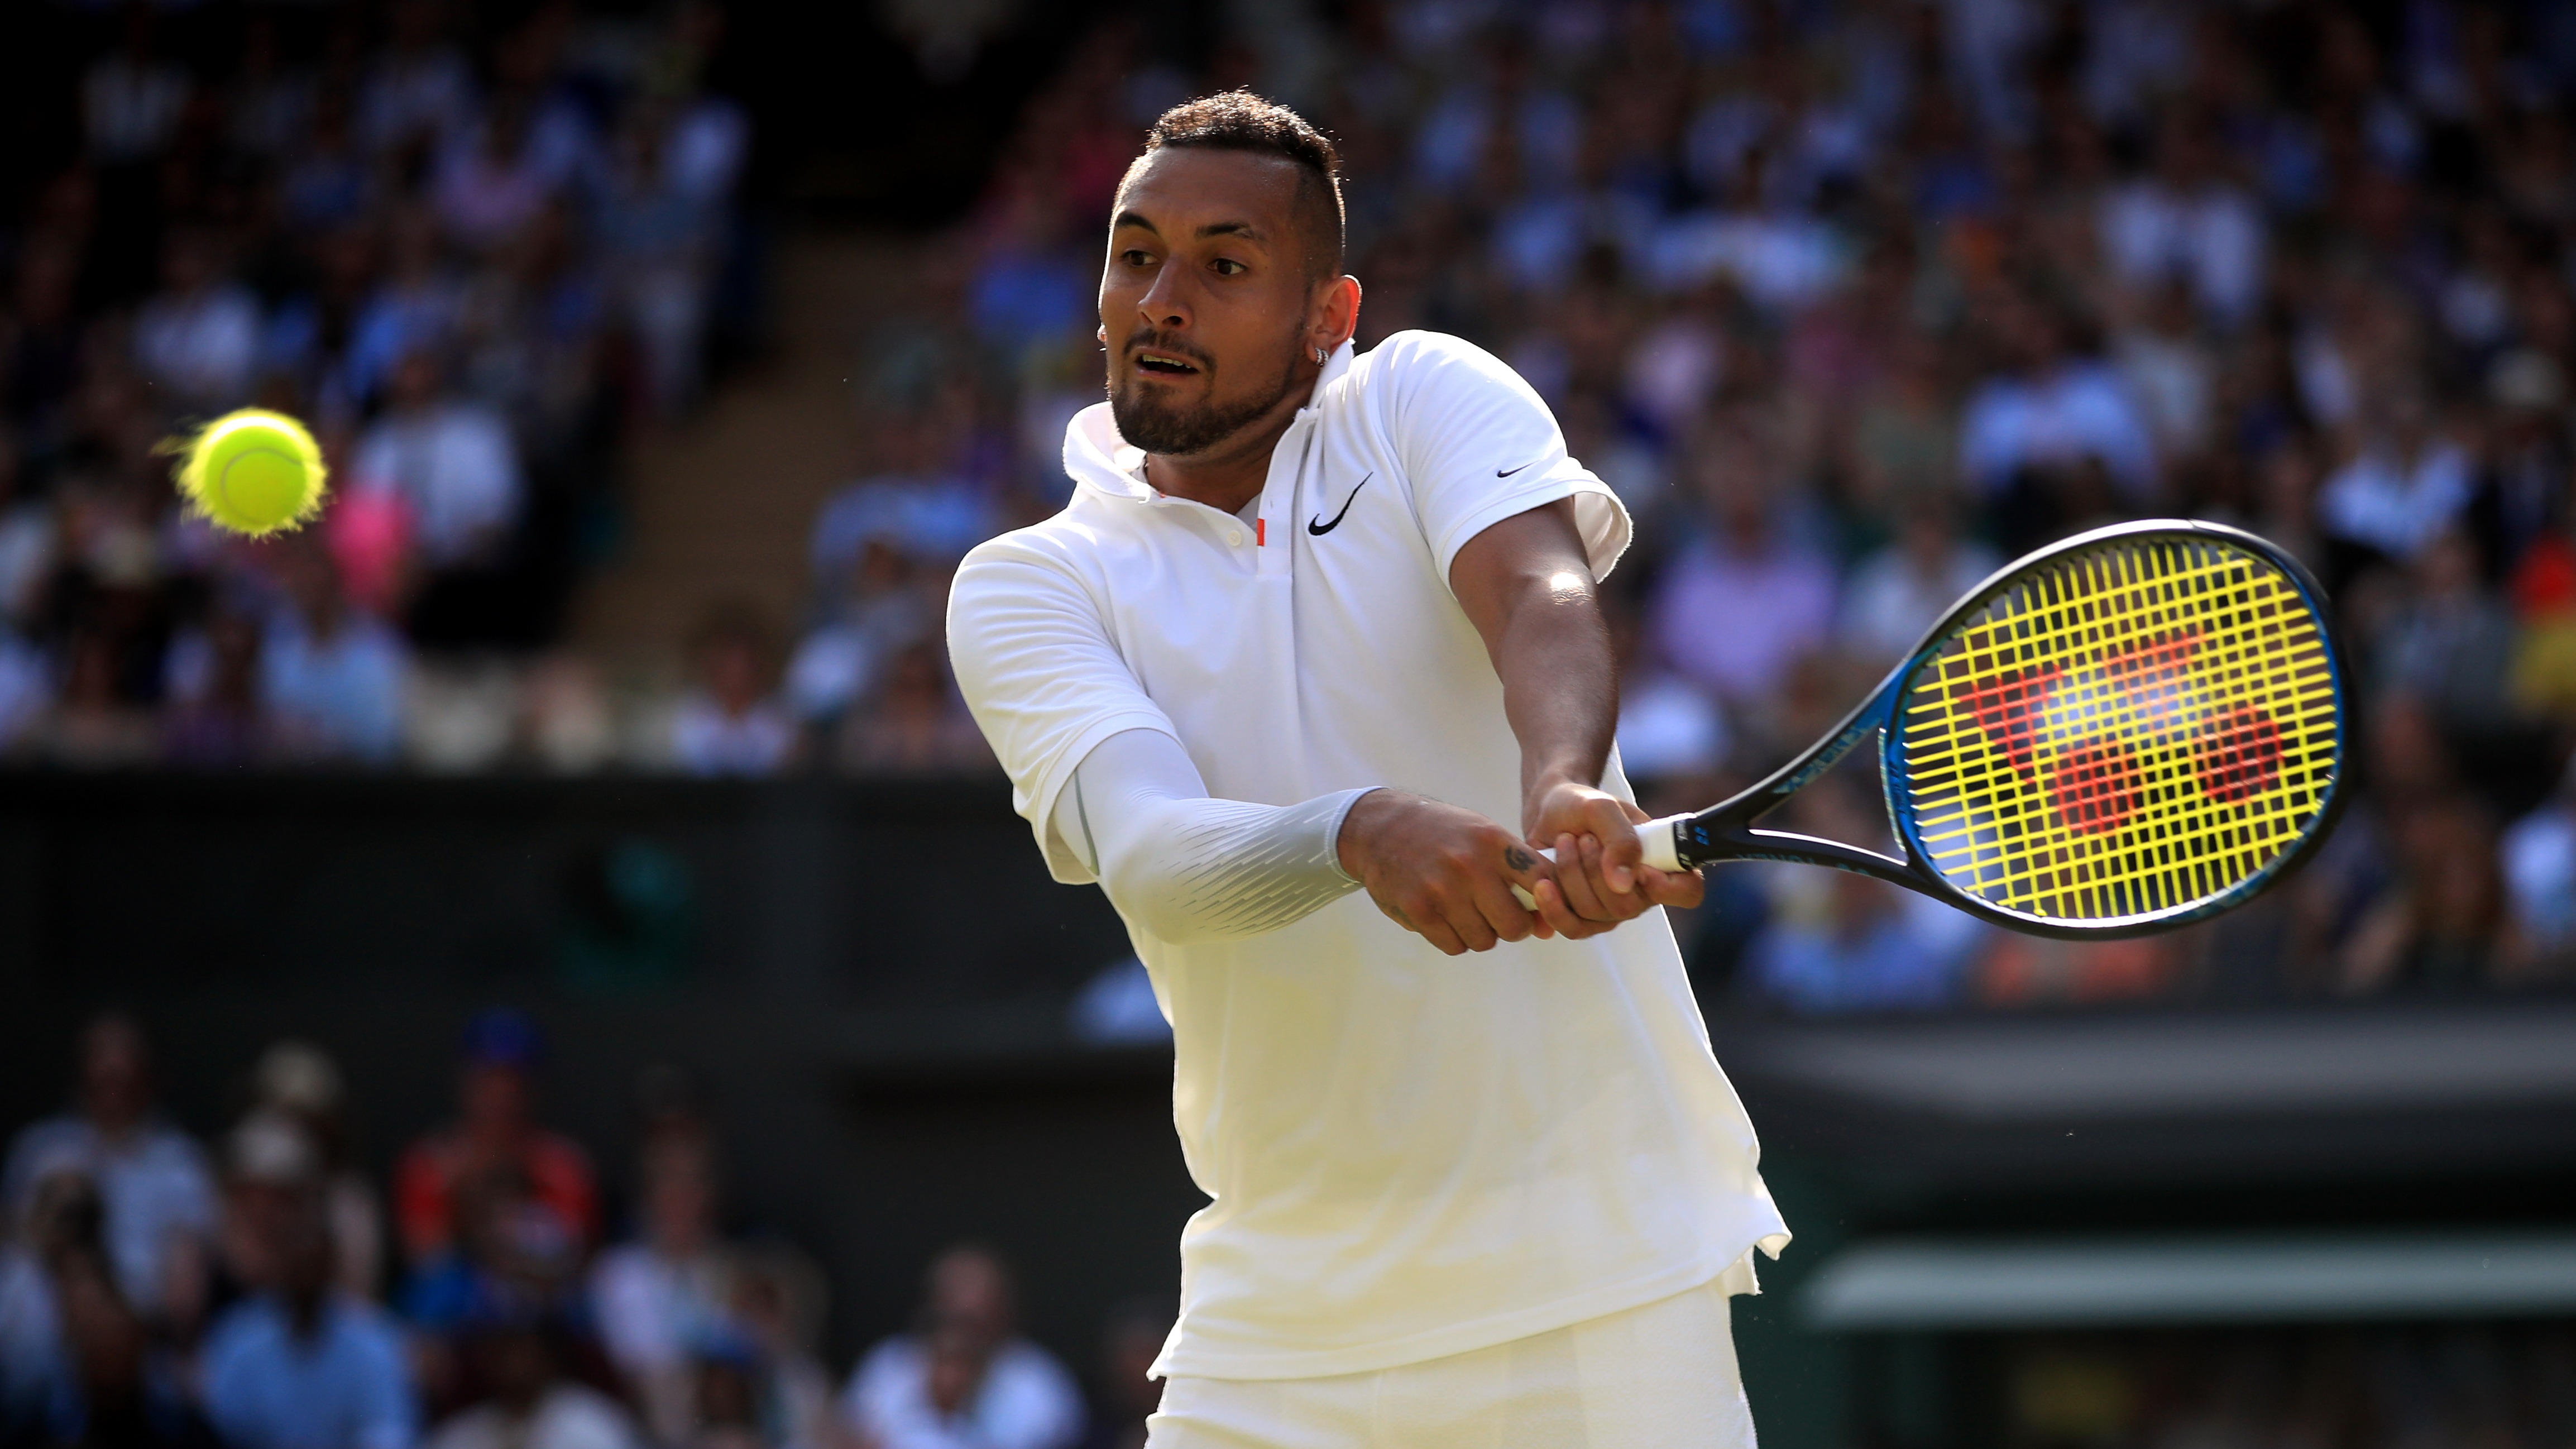 'I was spiralling out of control' Tennis player Nick Kyrgios opens up